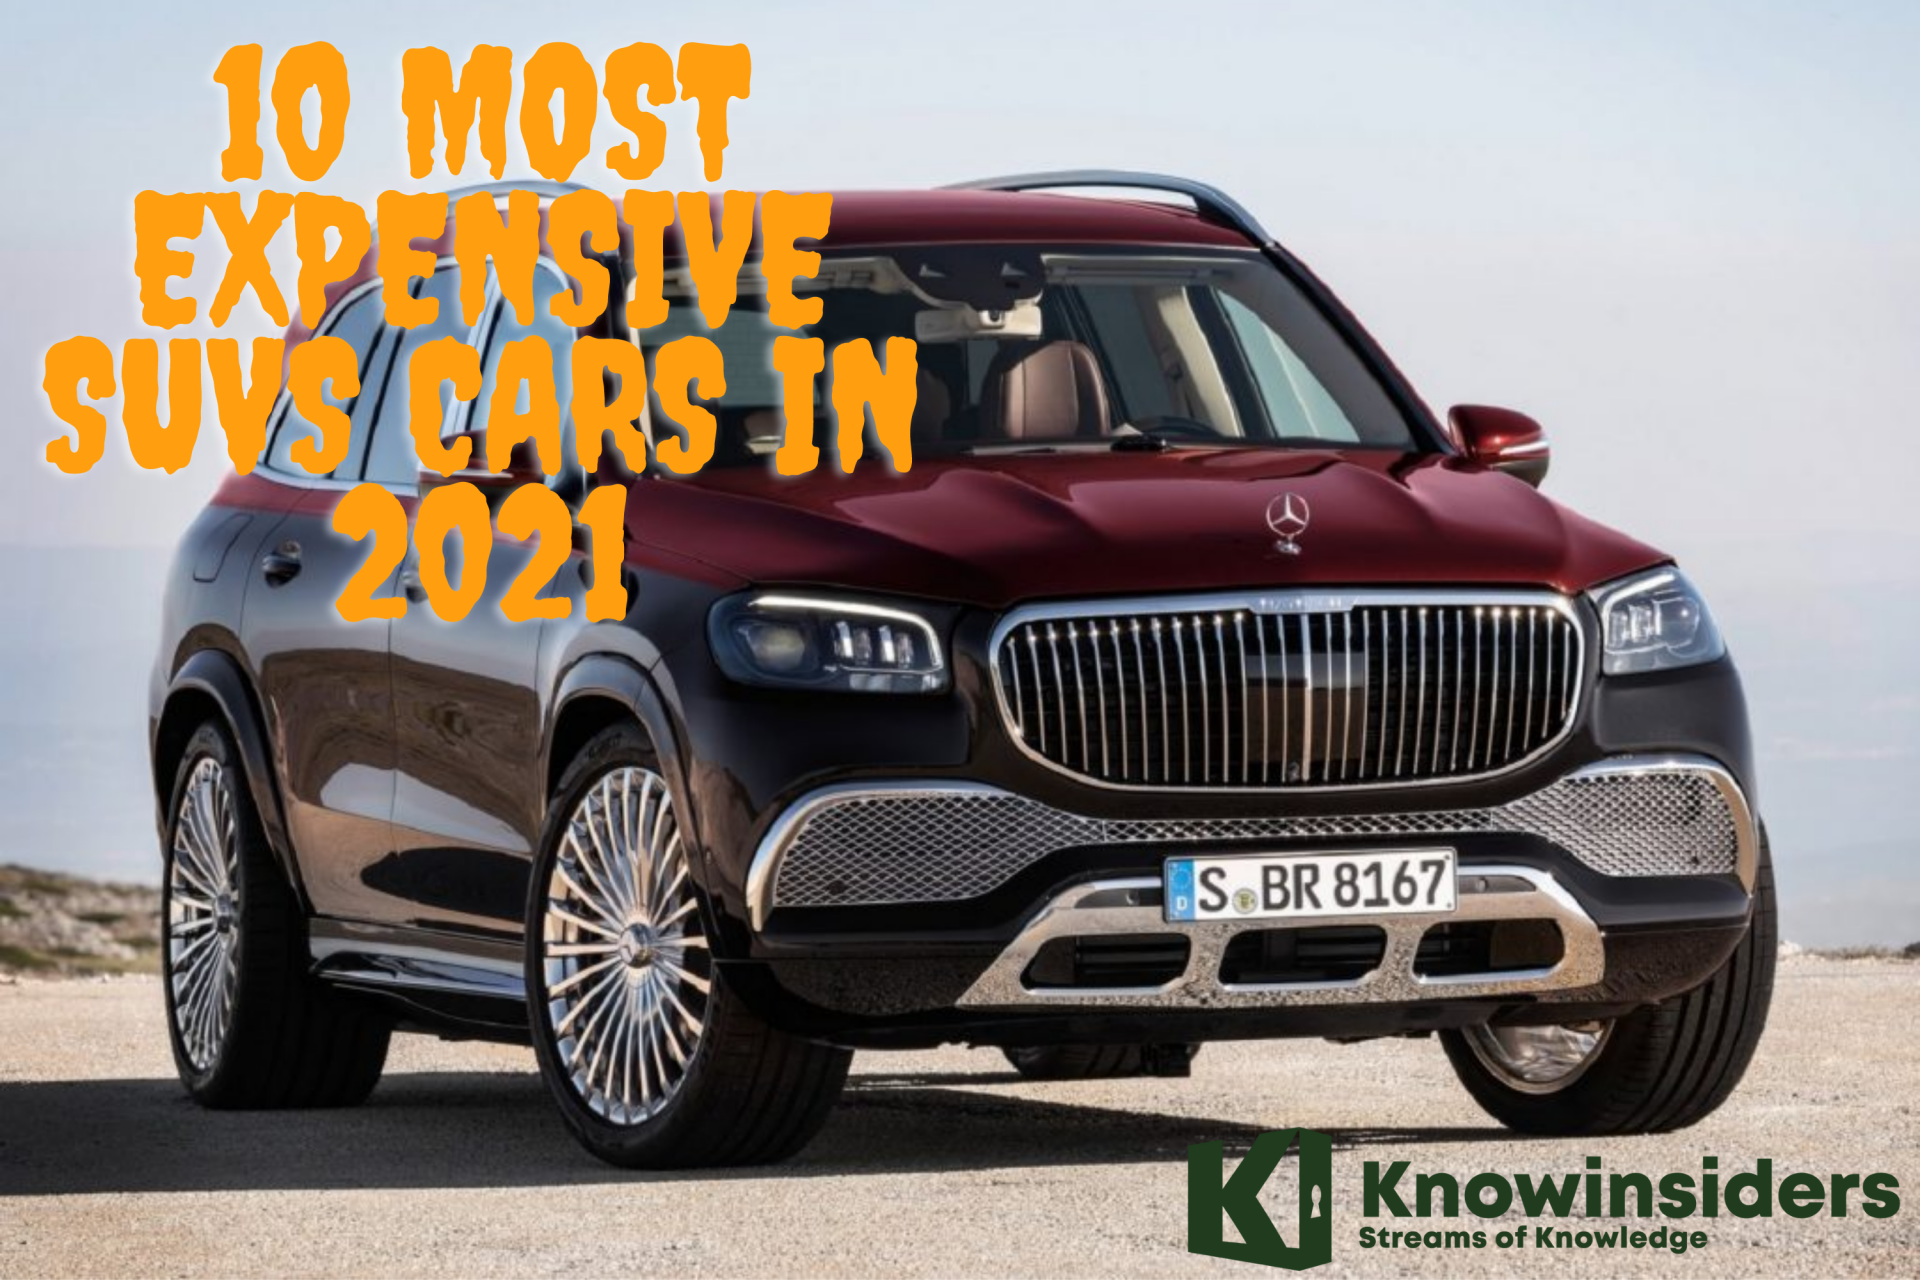 TOP 10 SUVs Car - Most Expensive in 2021